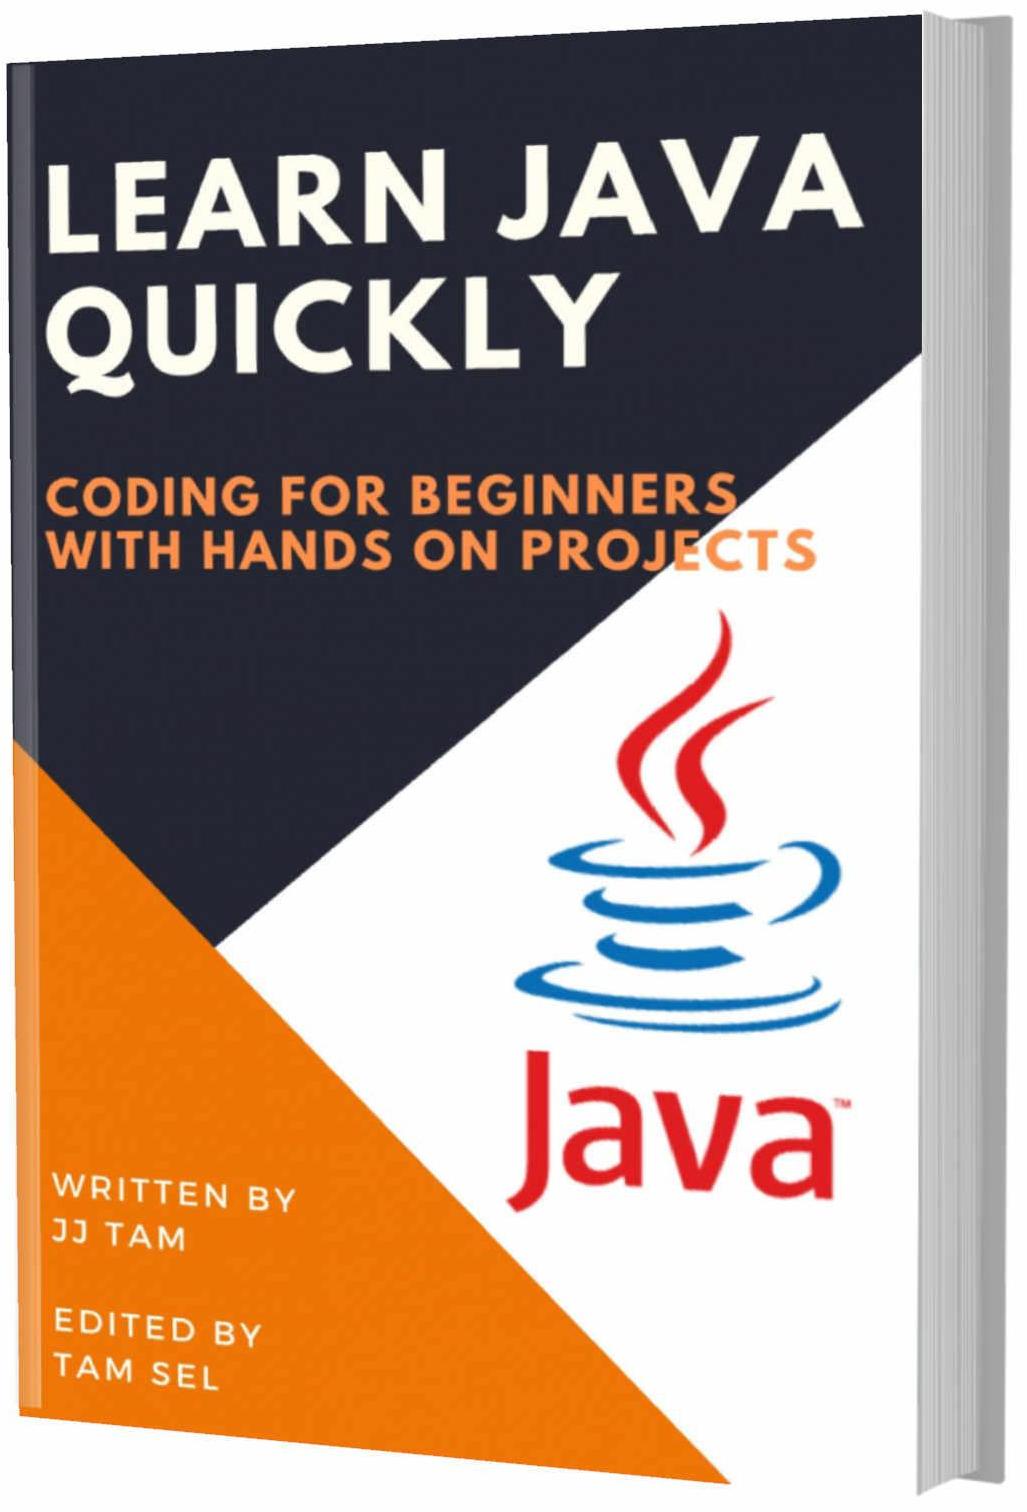 which book should i use to learn java